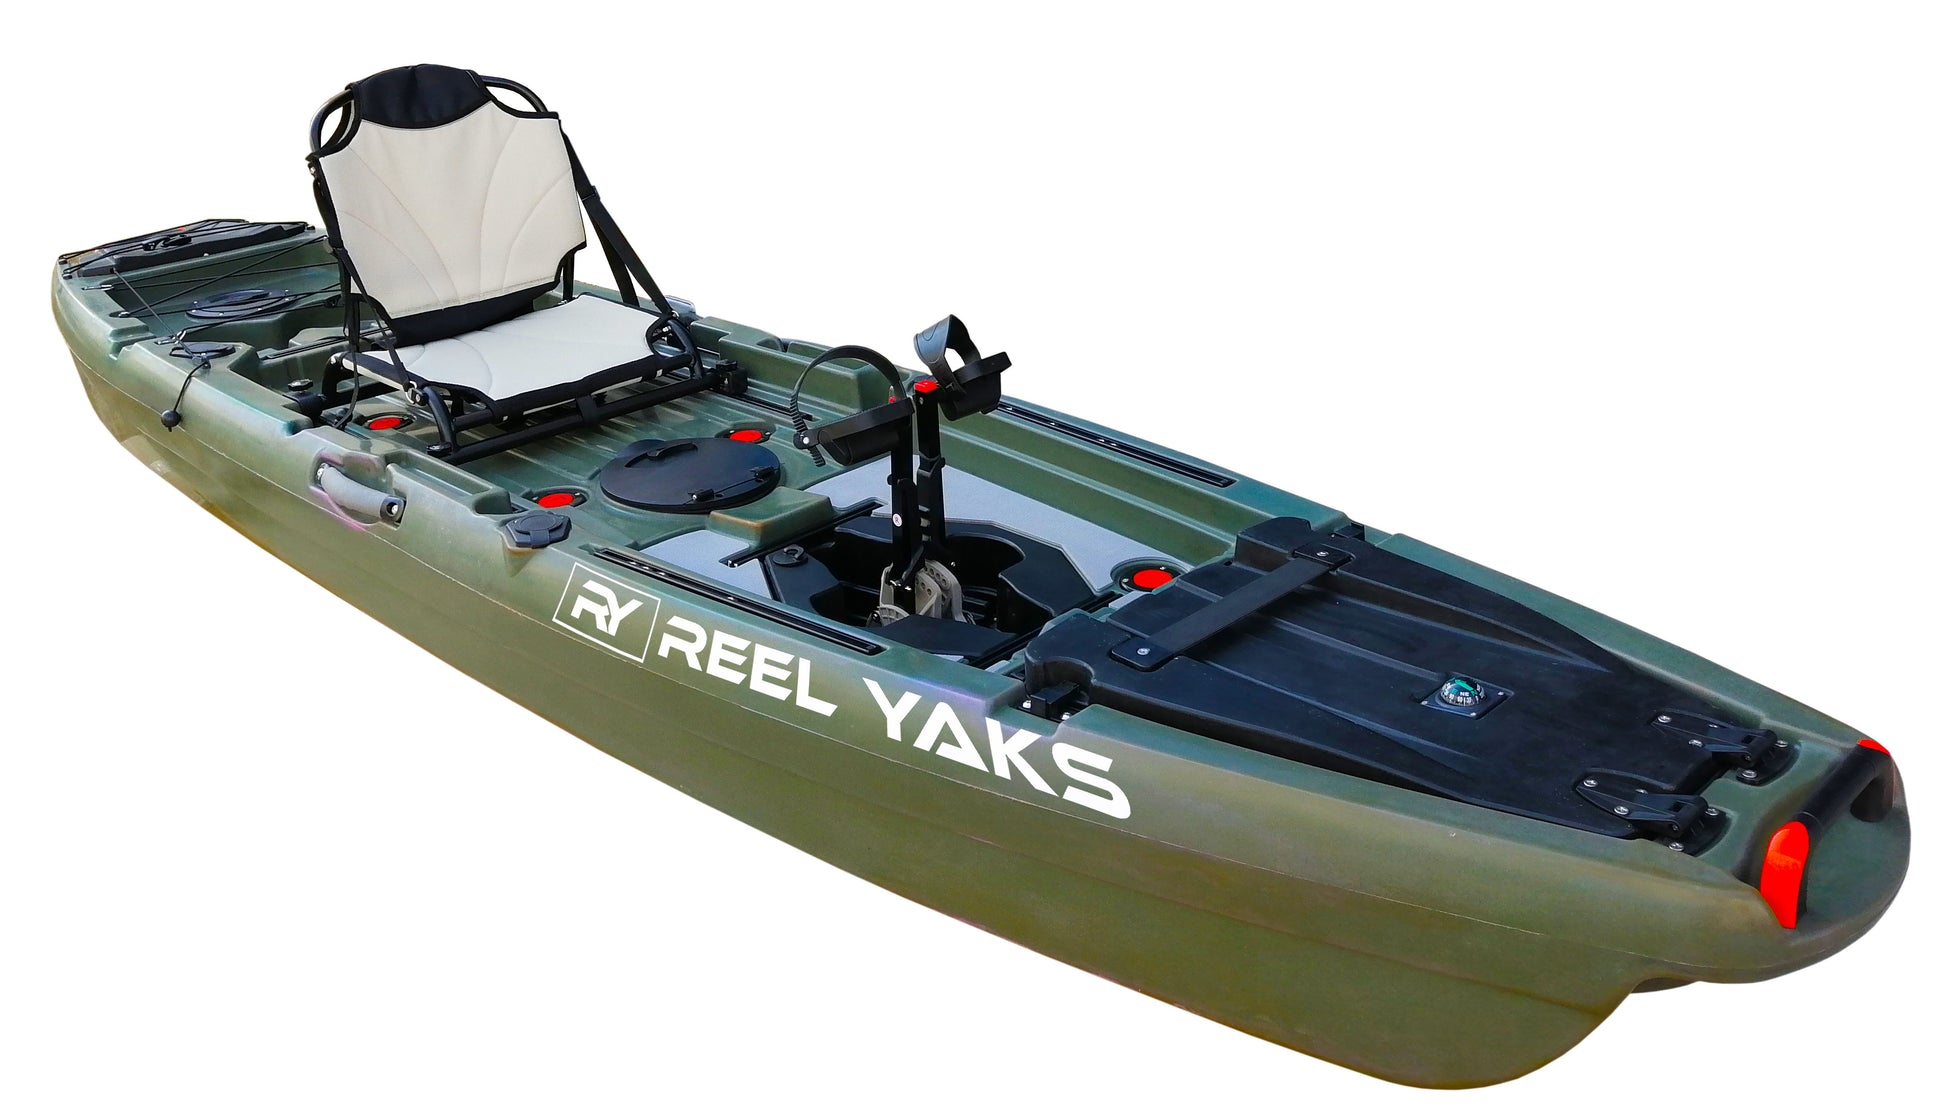 Reel Yaks Pedal Kayak Fishing Angler 11’ | Sit On Top or Stand | 500lbs Capacity for adult Youths Kids| Suitable for Ocean Lakes Rivers | Foot O